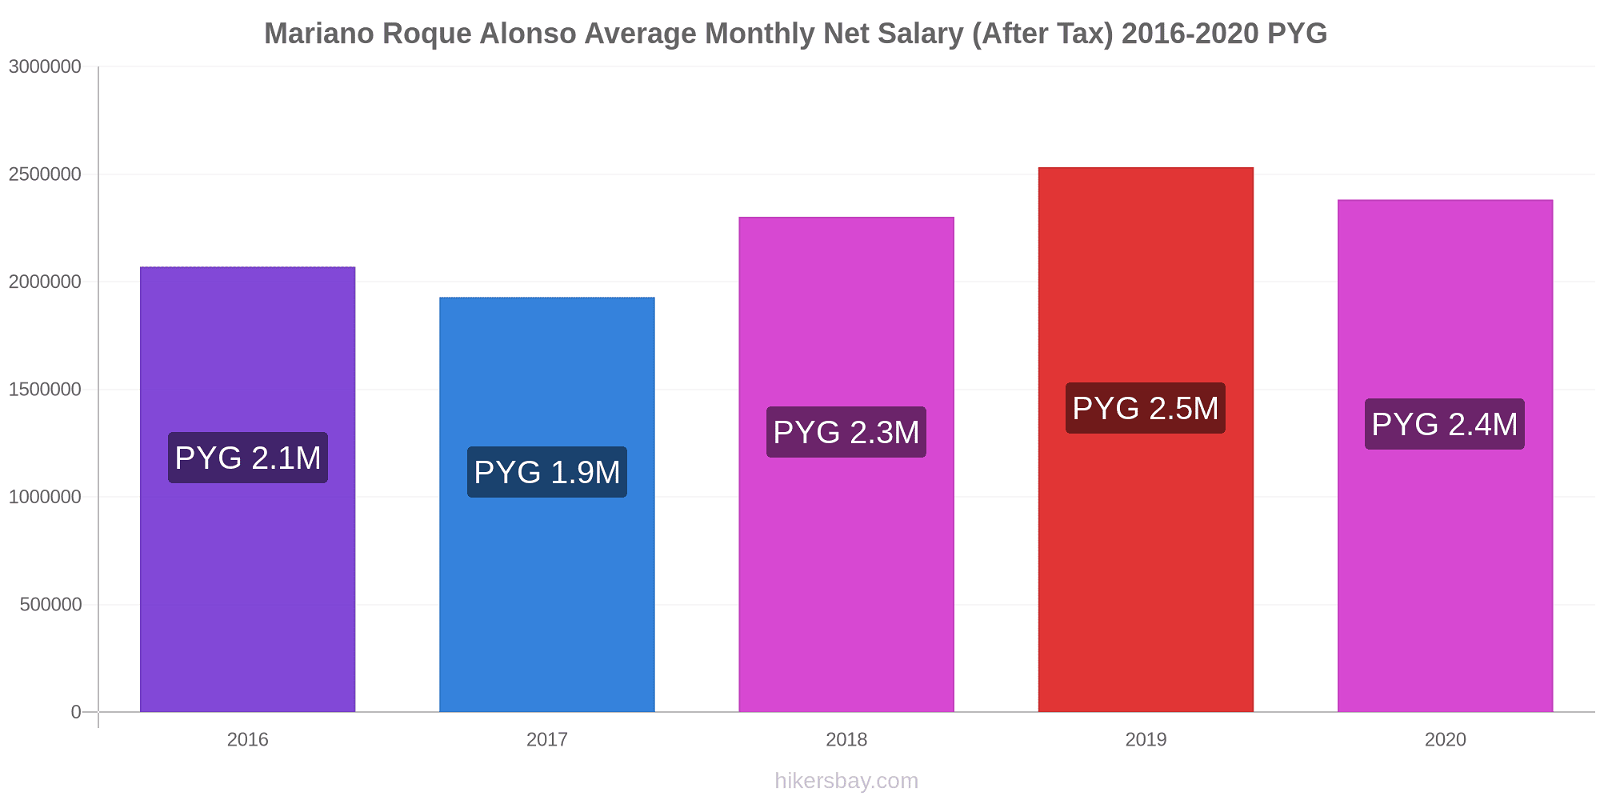 Mariano Roque Alonso price changes Average Monthly Net Salary (After Tax) hikersbay.com